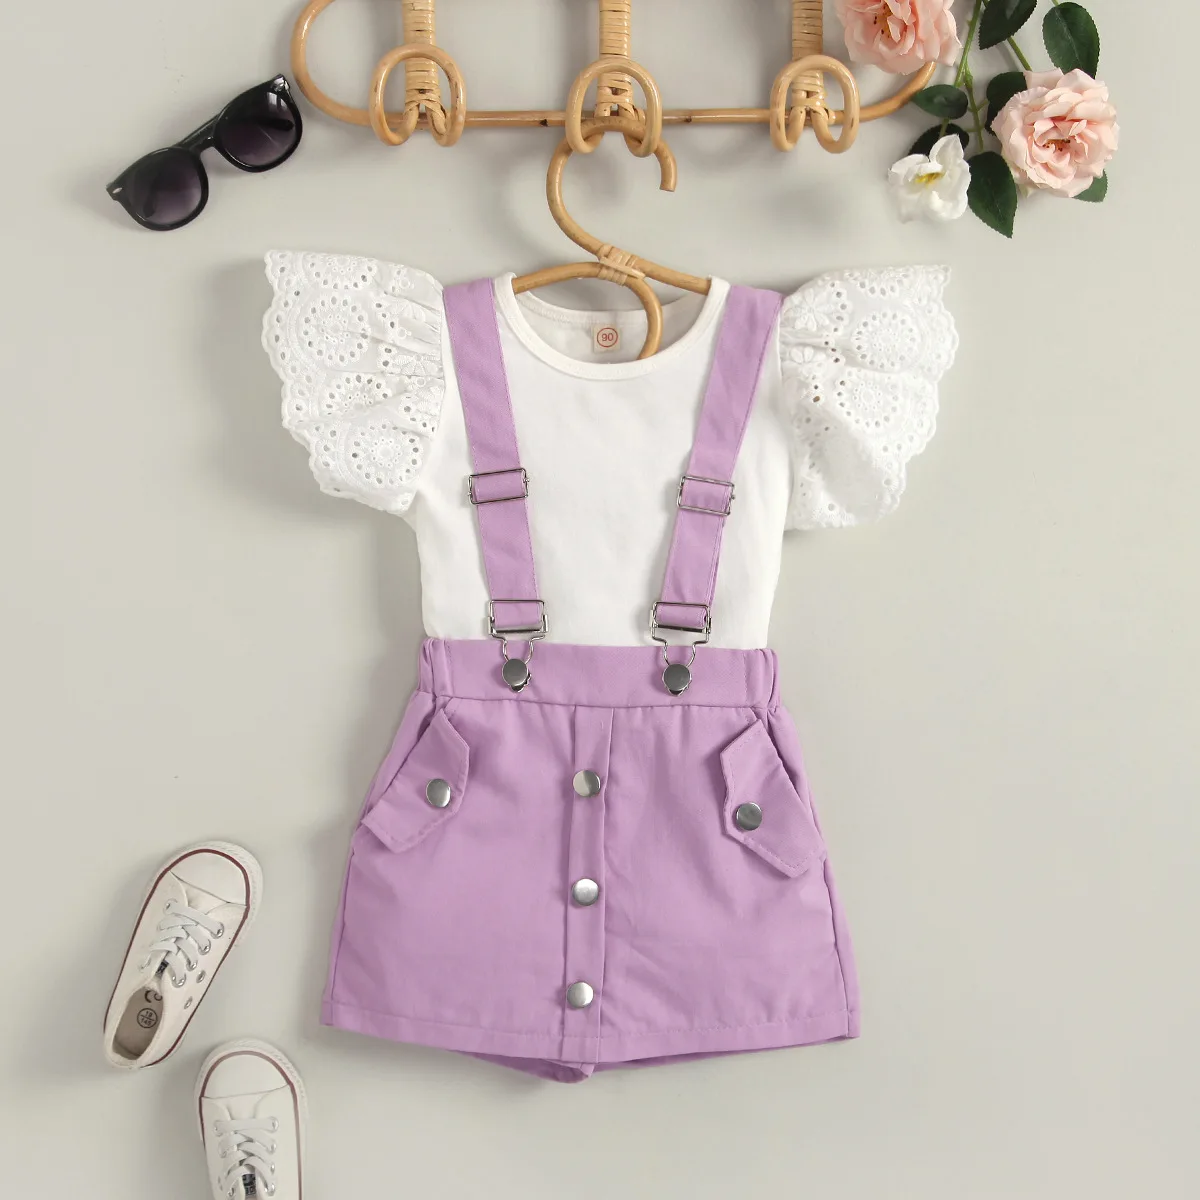 

New fashion summer toddler girls ruffled lace sleeveless knitting T-shirt + overalls skirt 2 pieces clothing set, Picture shows